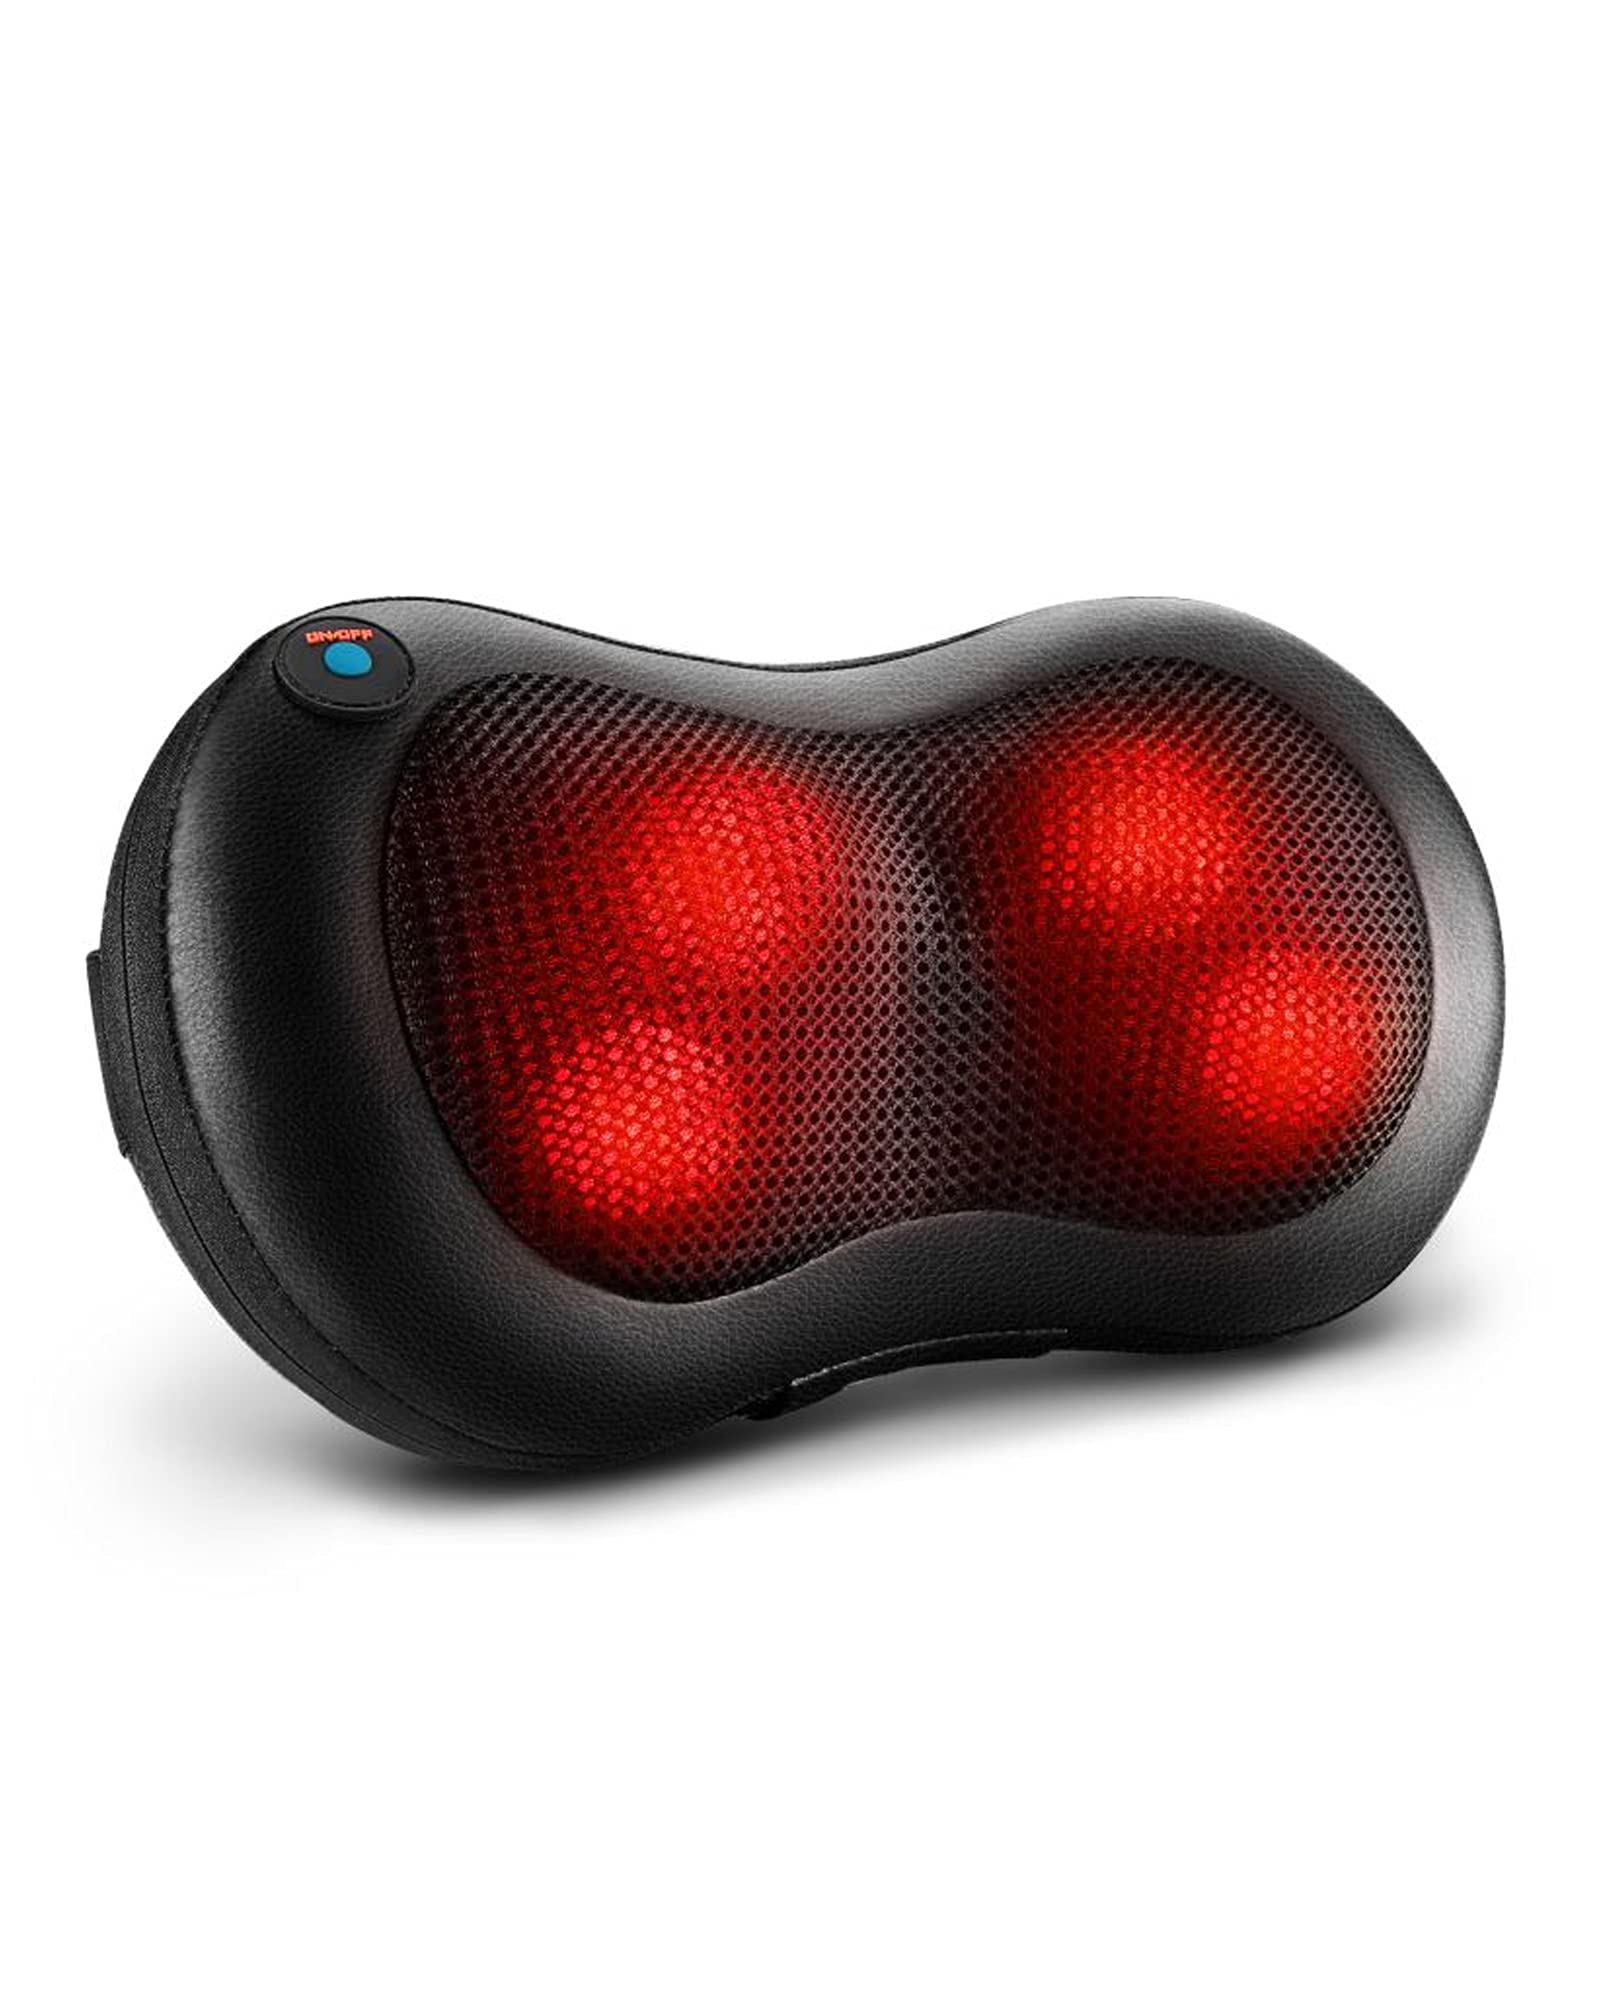 Neck And Shoulder Massager With Heat, Massagers For Neck And Back, Shiatsu  Massage Pillow With 3D Deep Tissue Kneading For Back Shoulder Legs Foot  Body Pain Relief,At Home Office Car, Gift For